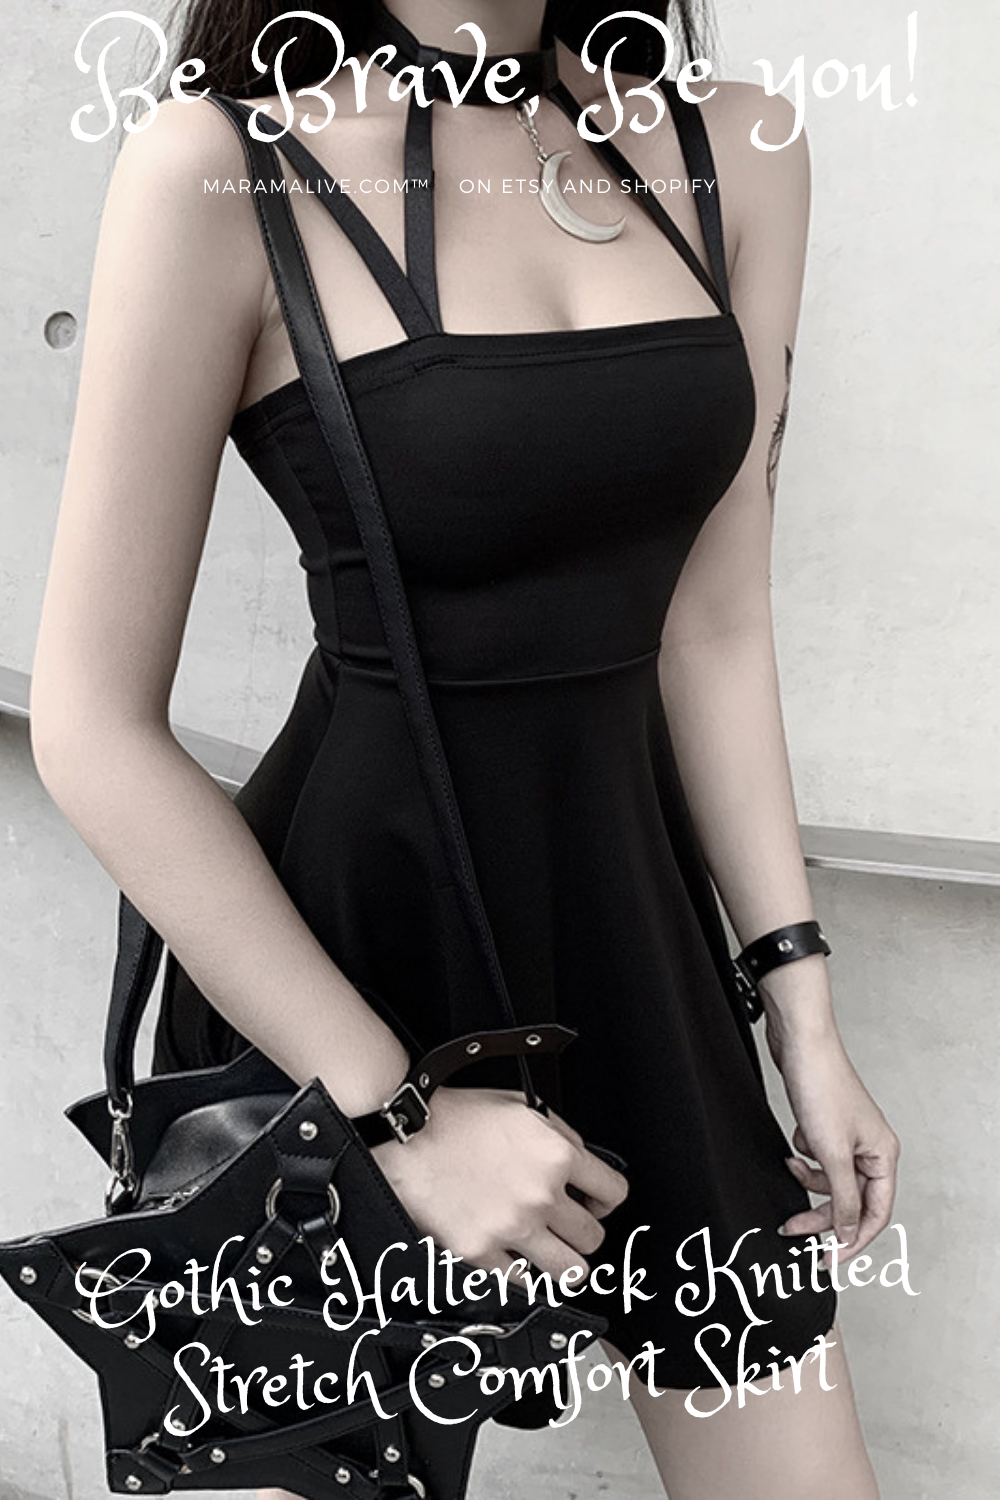 A woman is posing in a Gothic Halter-neck Dress -Unique Strap Sling Dress by Maramalive™.